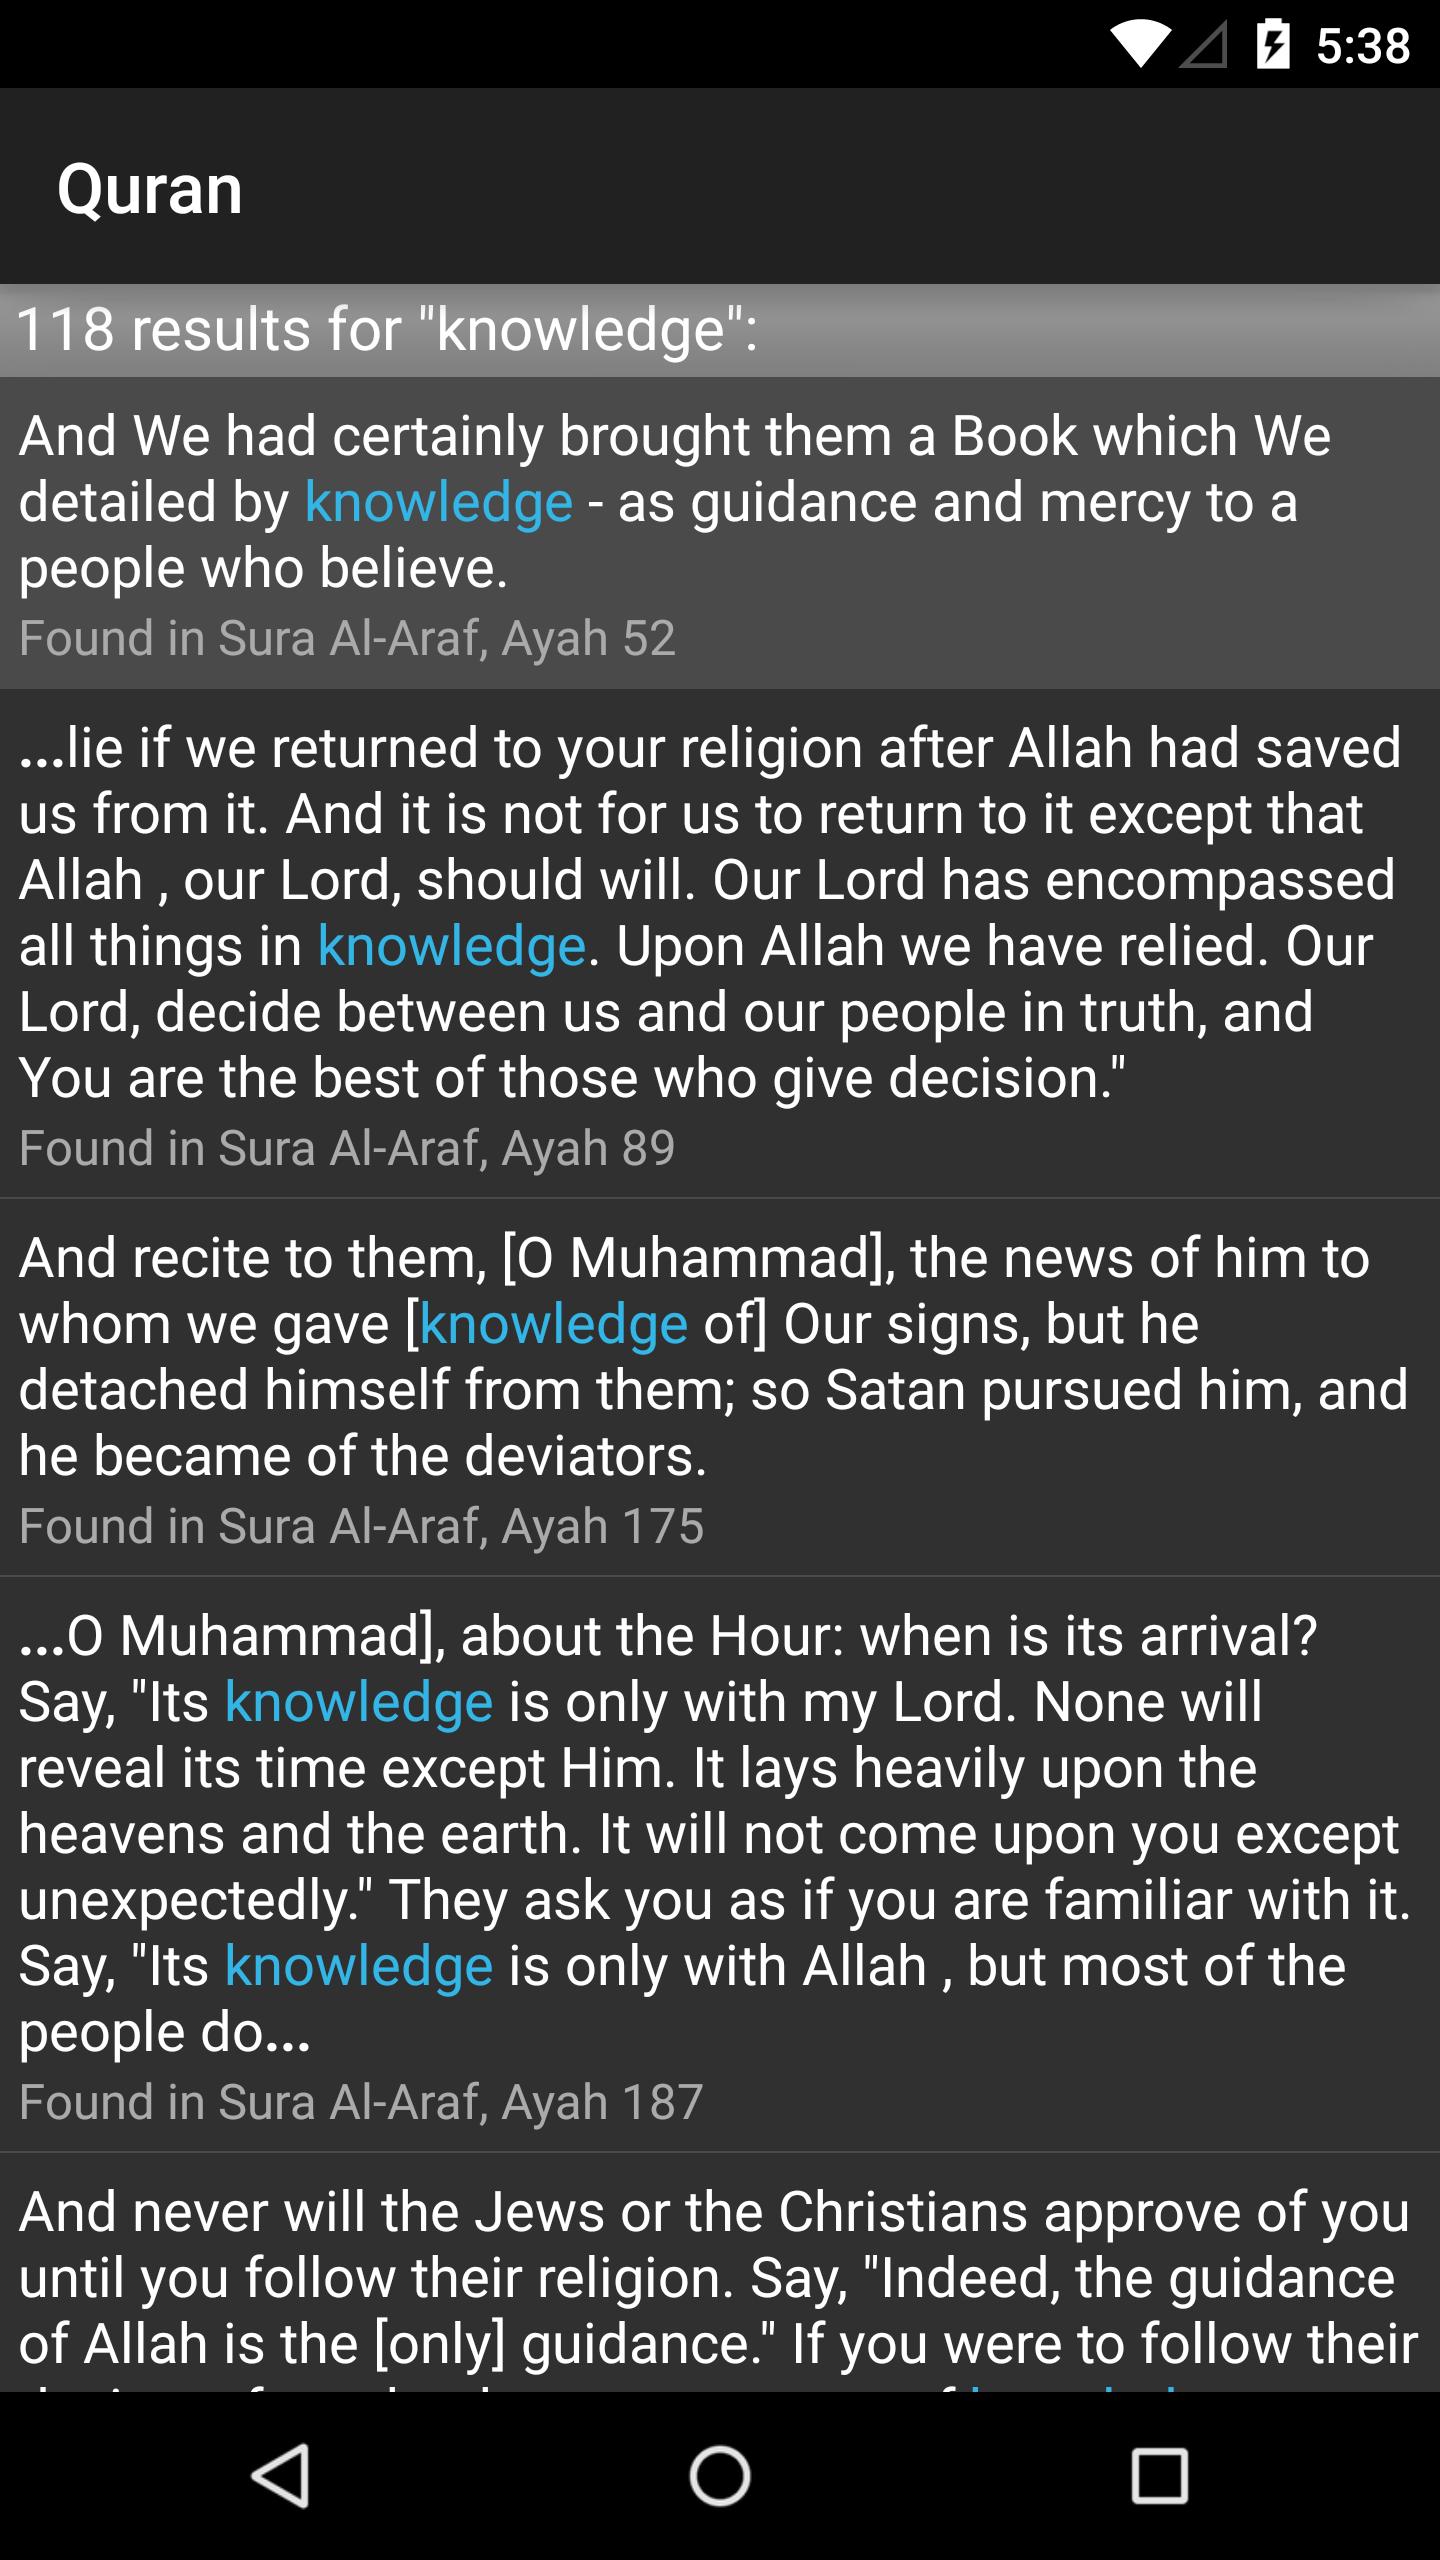 Quran for Android 3.0.2 Screenshot 7